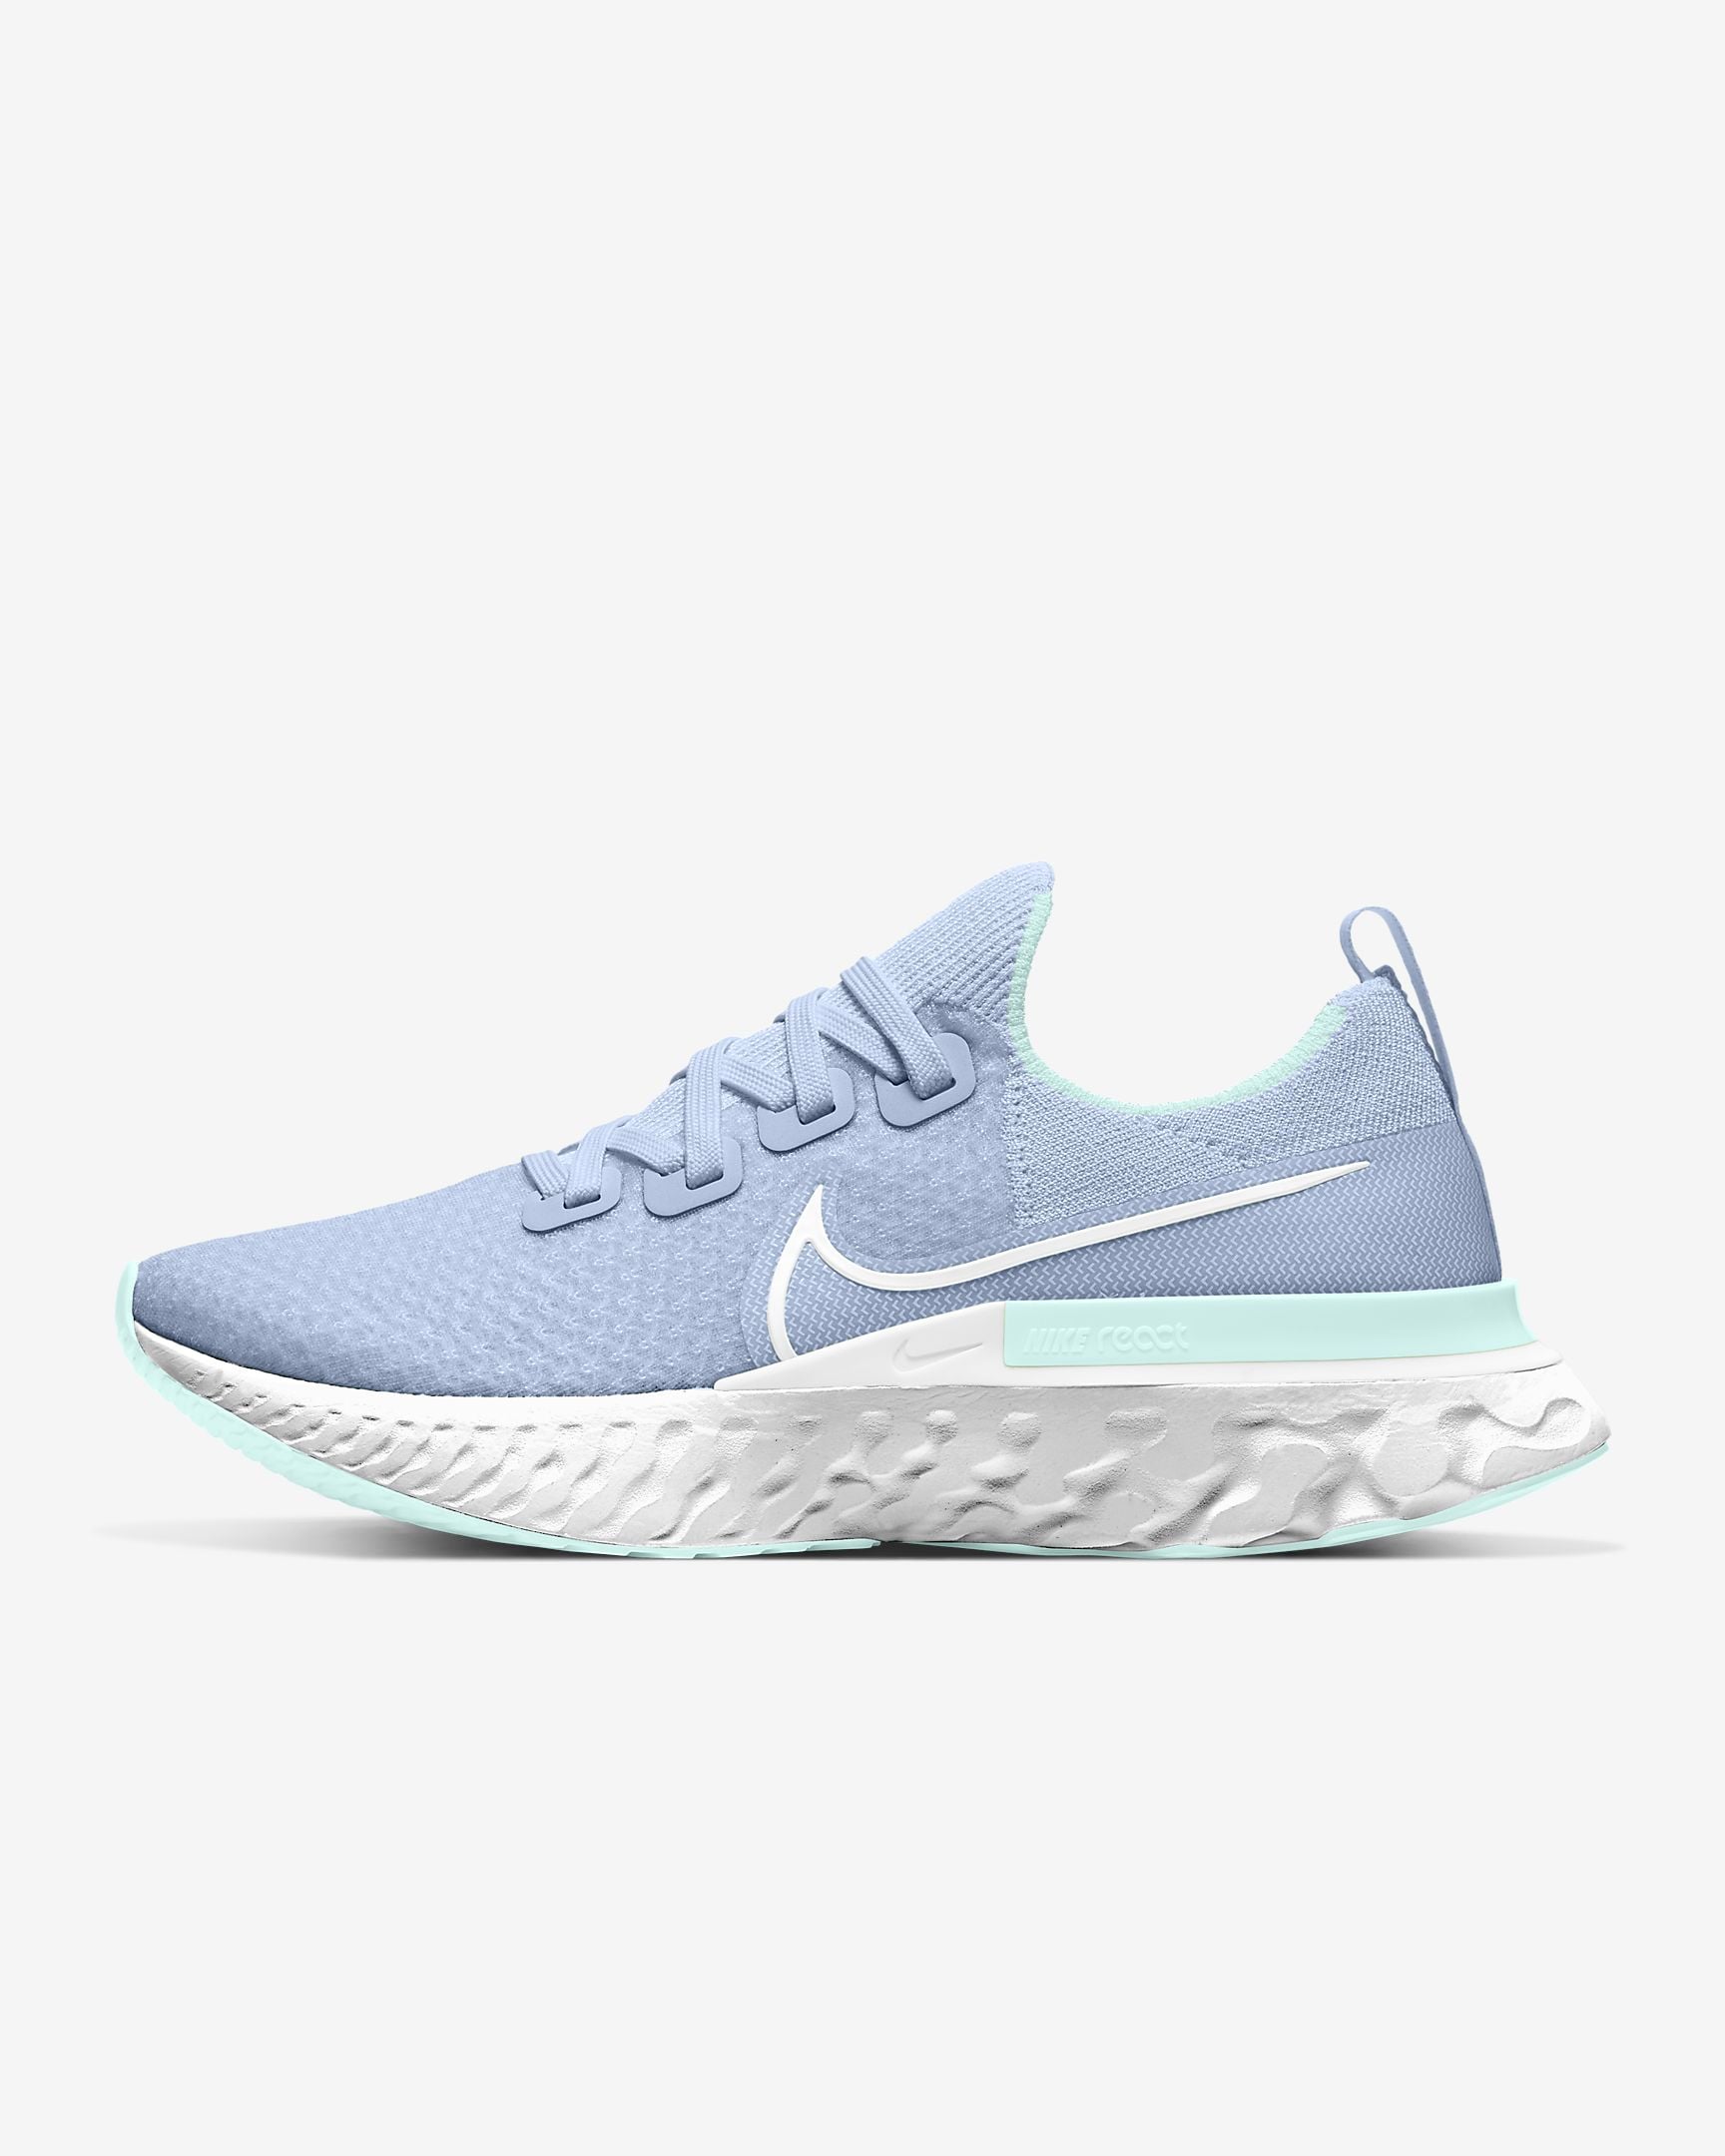 blue and white sneakers nike